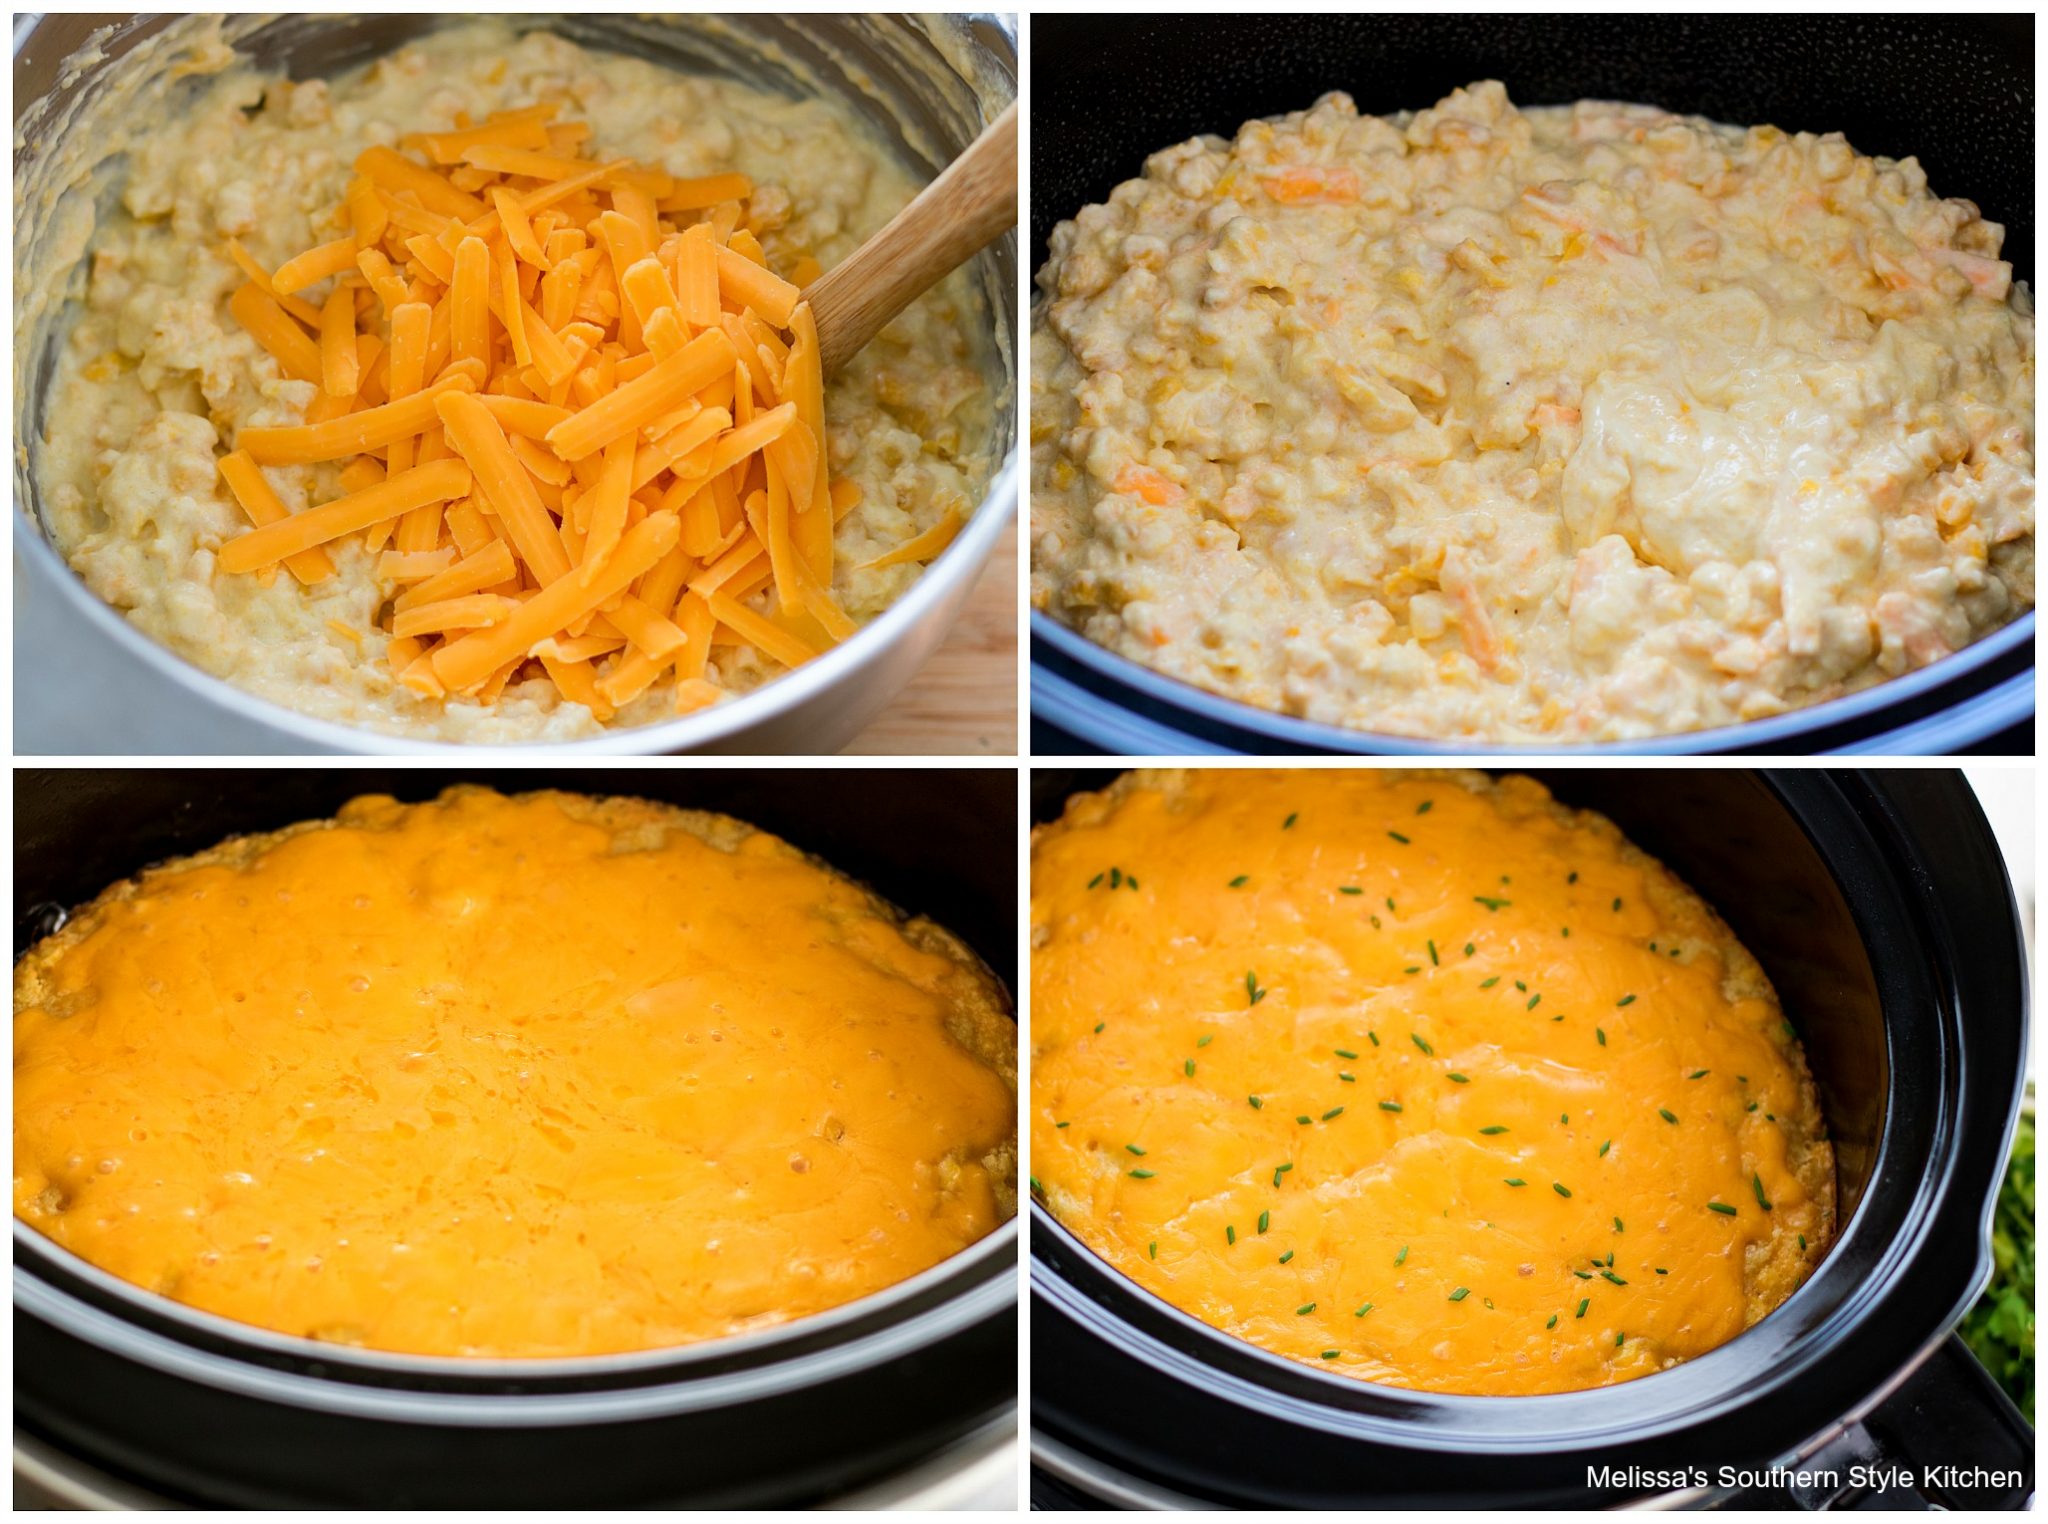 step-by-step preparation images cornbread cheese and corn in a crock pot